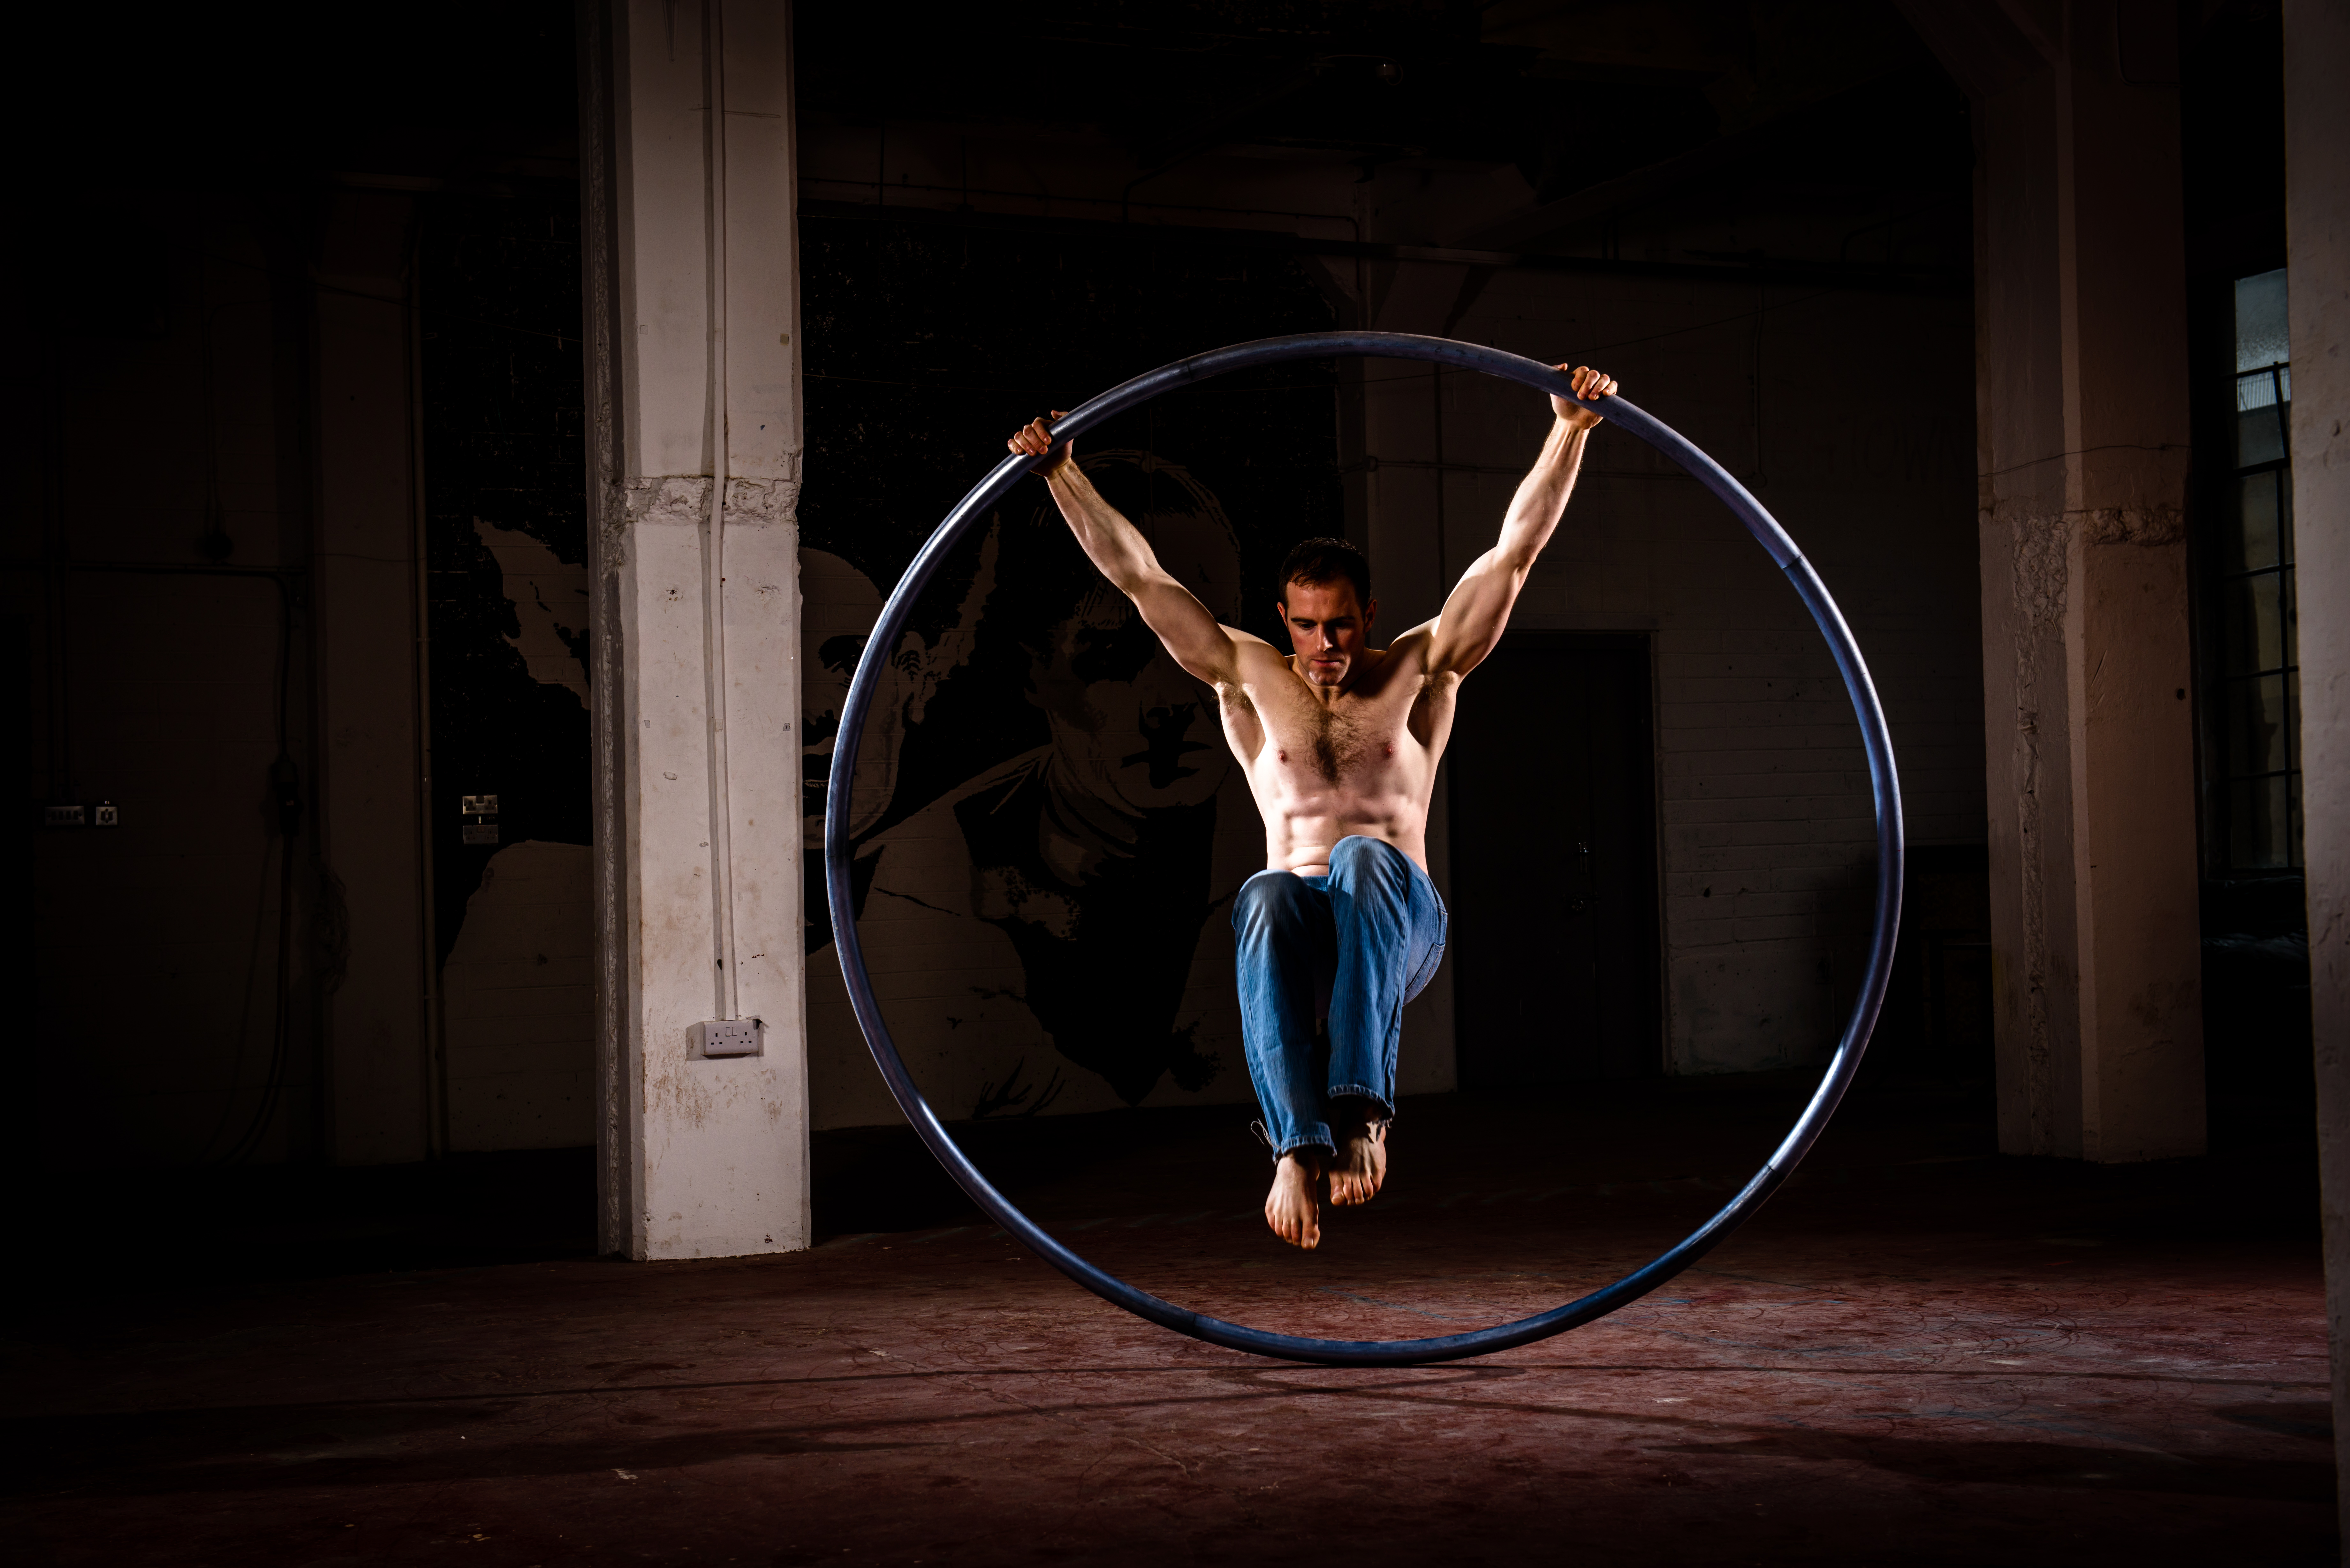 Cutting Edge CYR Wheel acrobat for hire with www.corporateevents.ie